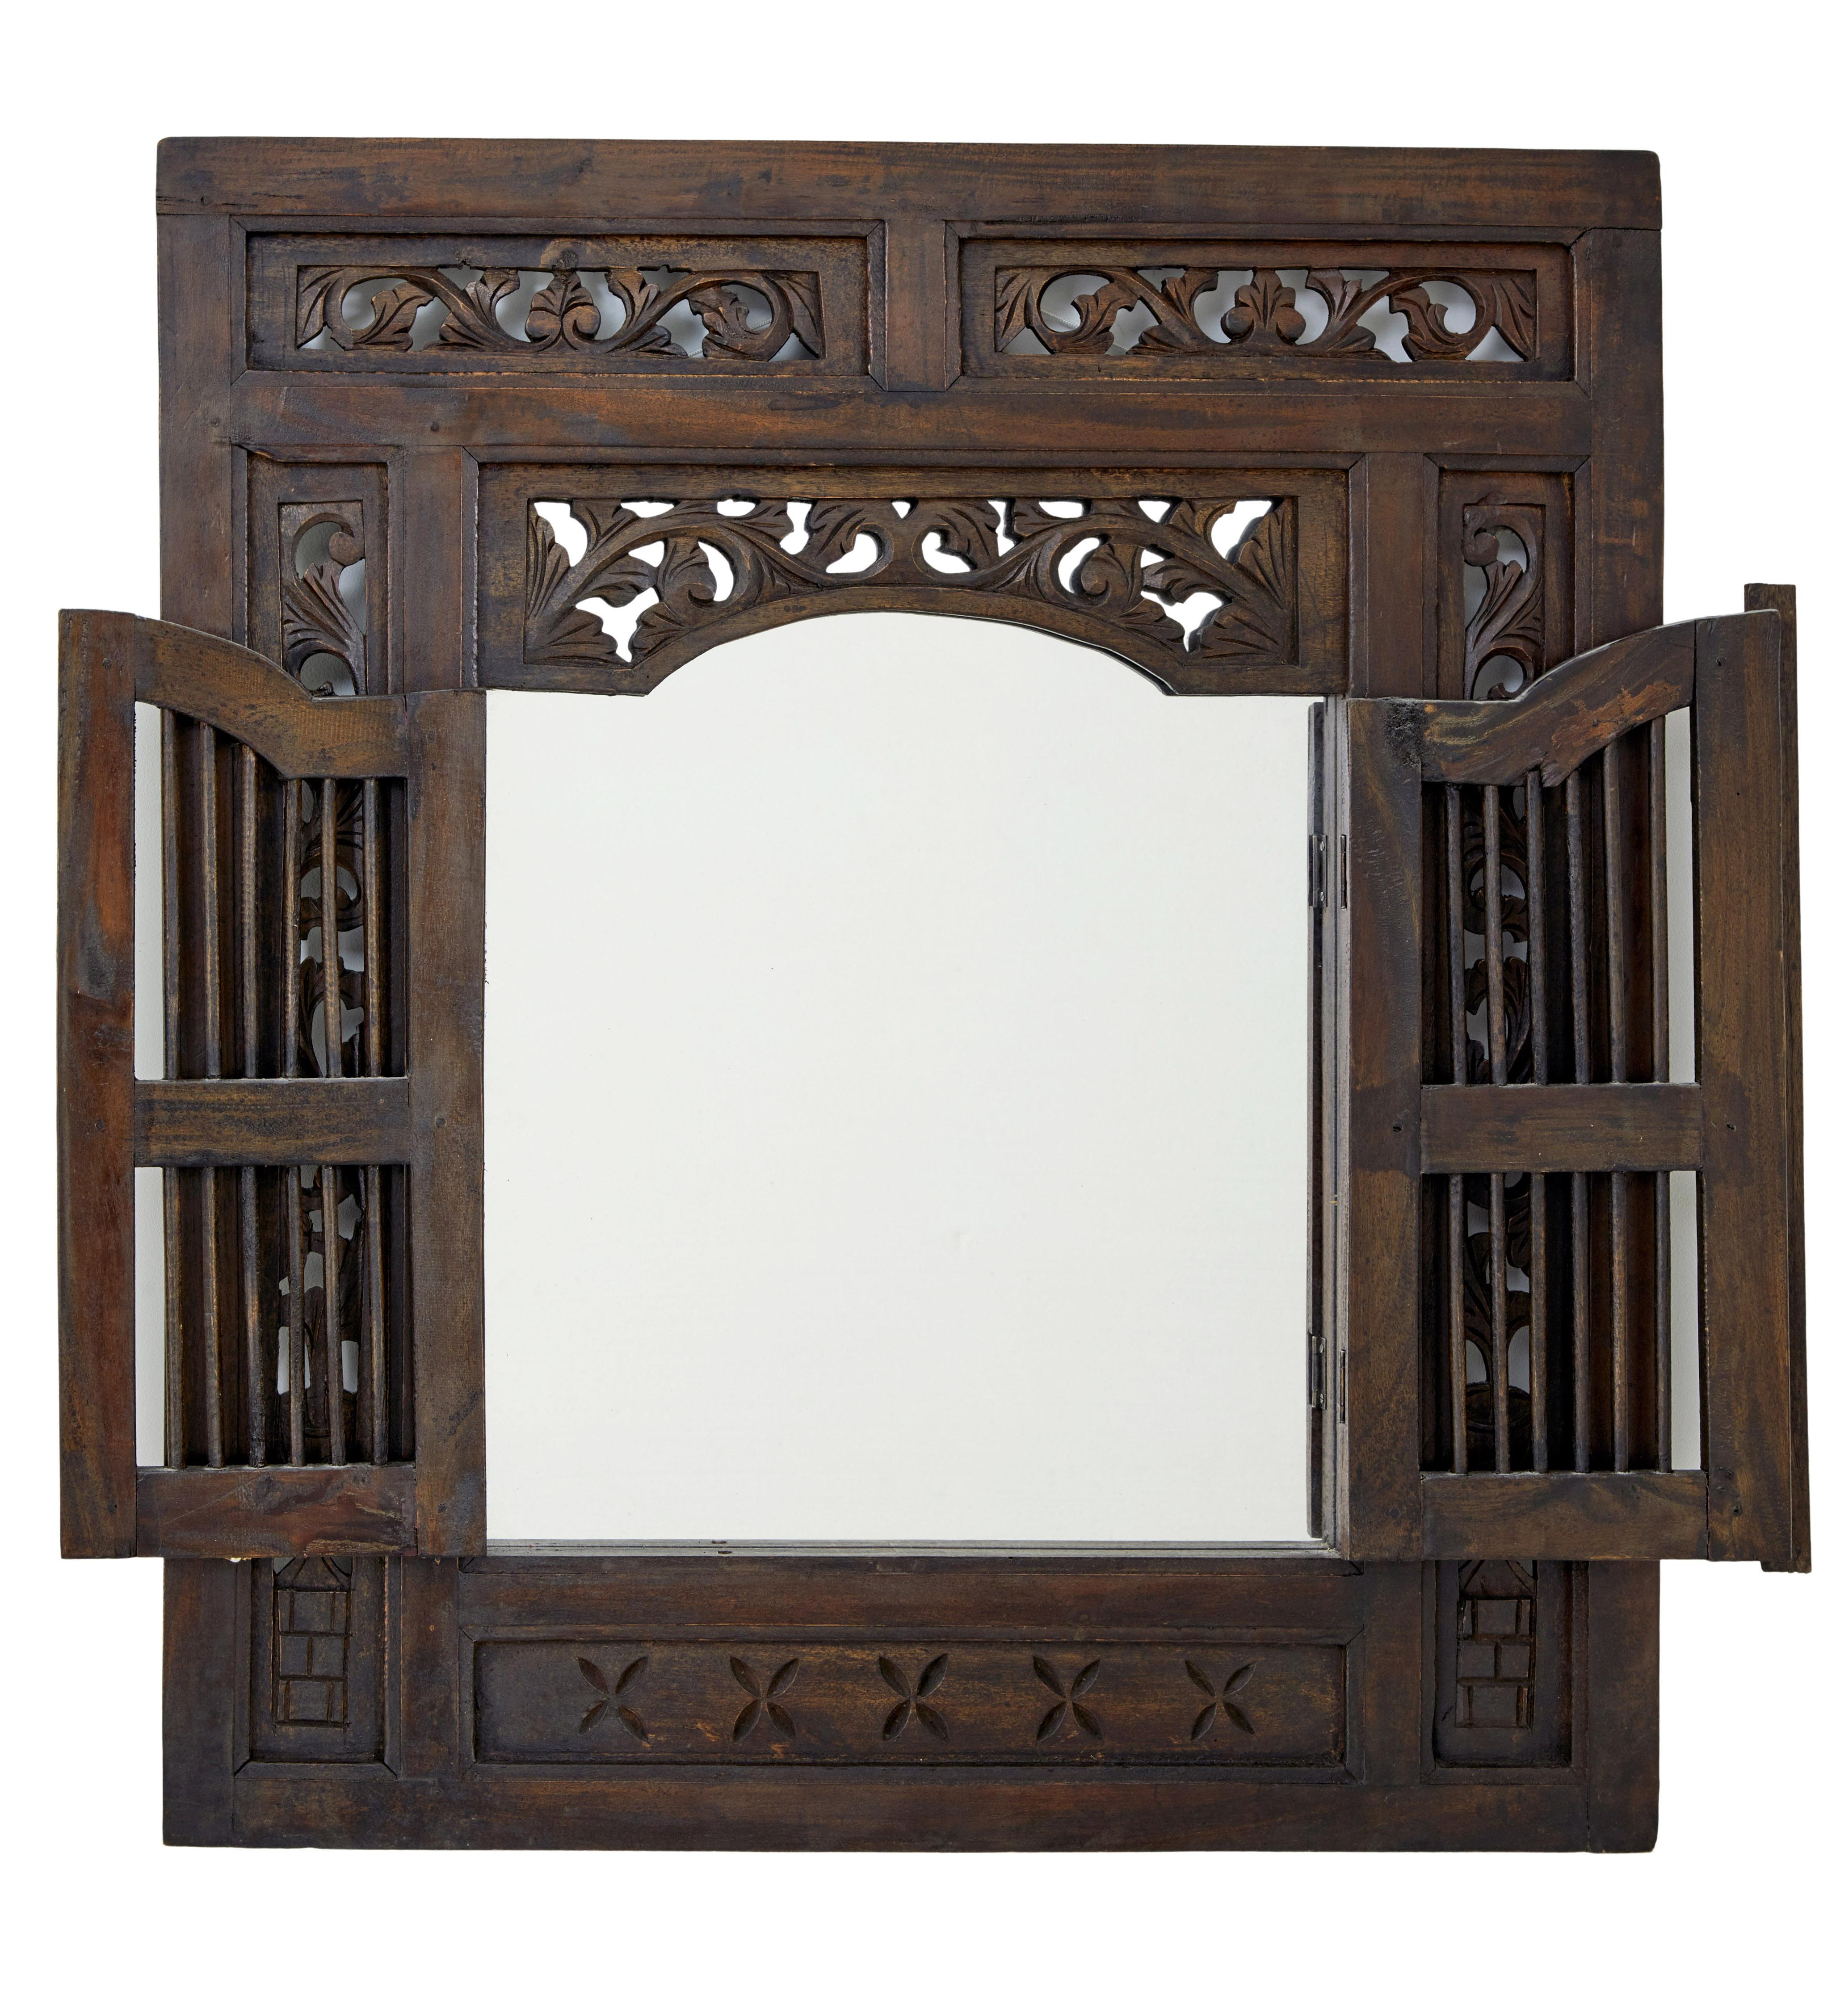 Decorative mirror made from oriental hardwood.

Central carved pierced border, with a central double door opening which reveals the mirror.

Minor surface marks.